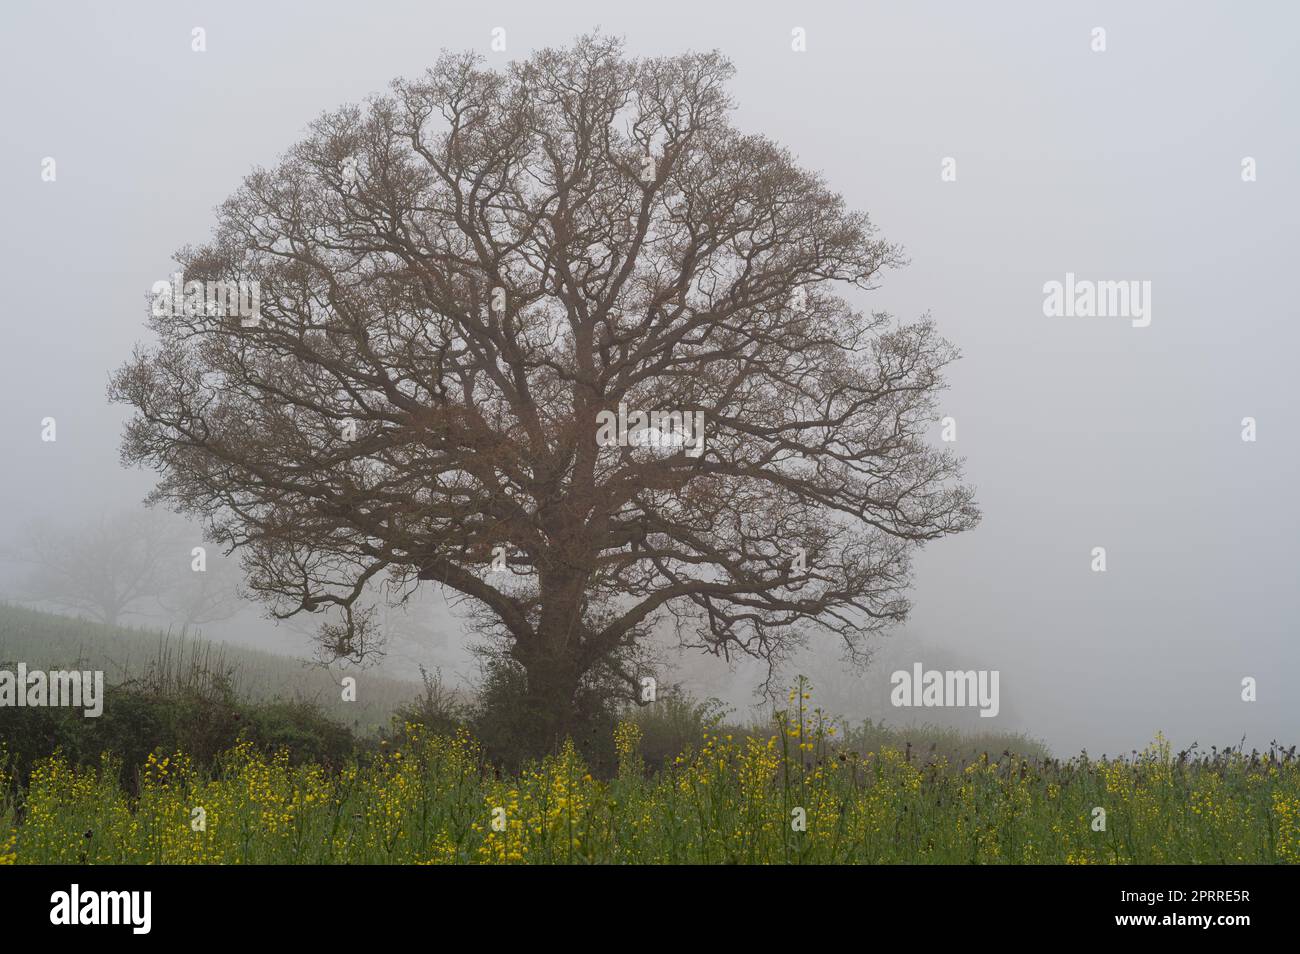 Lone tree in a fog, yellow rapeseed field in front. West Bergholt, Essex. Stock Photo